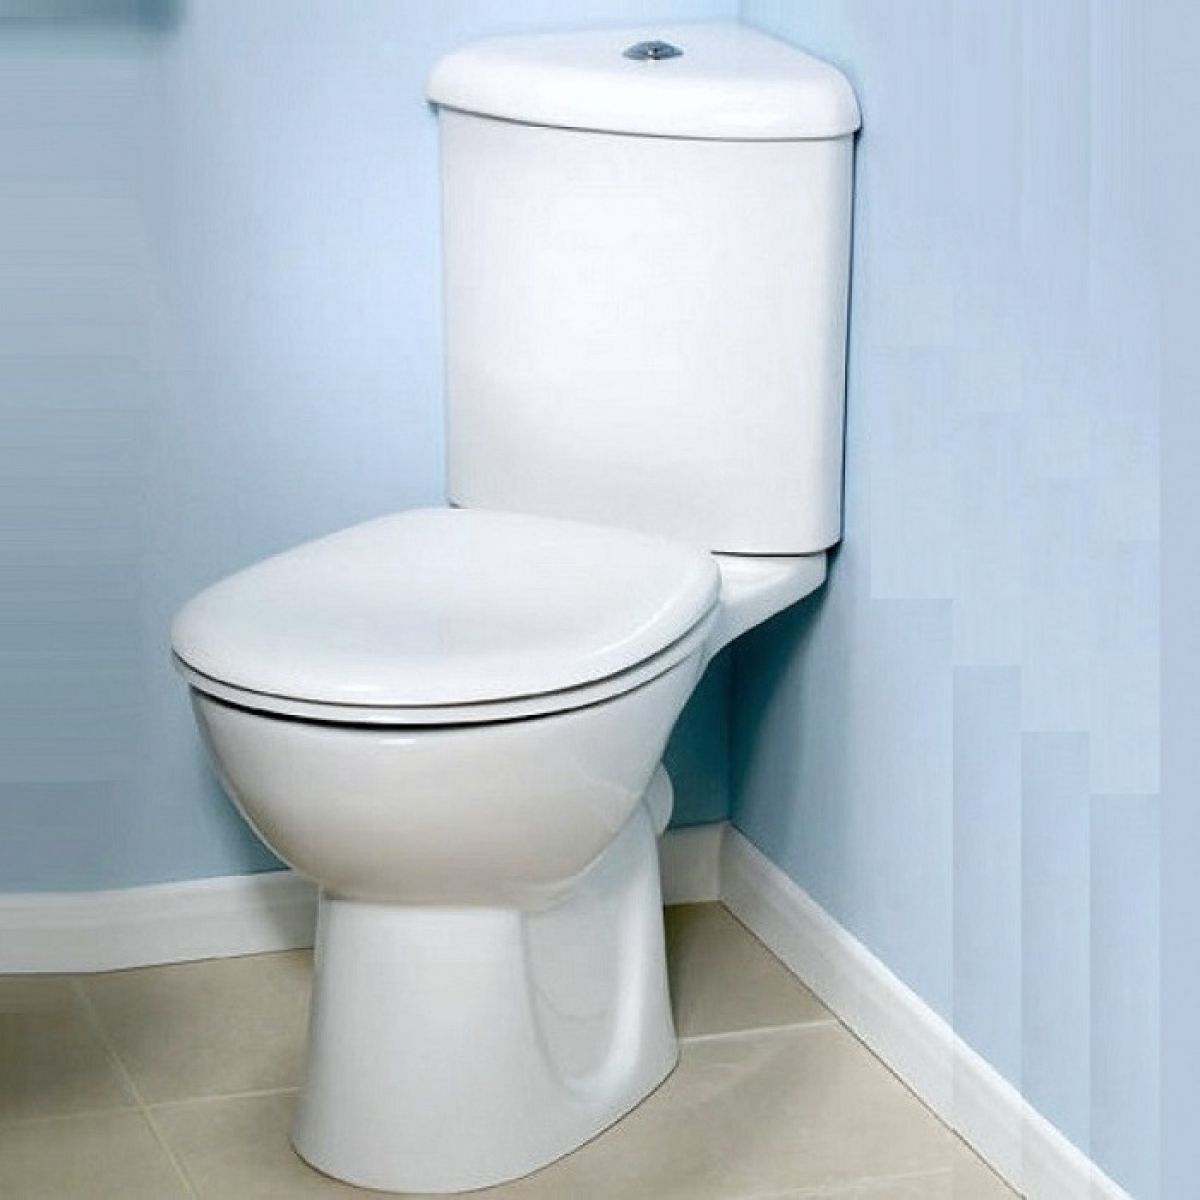 image example of a small cloakroom toilet